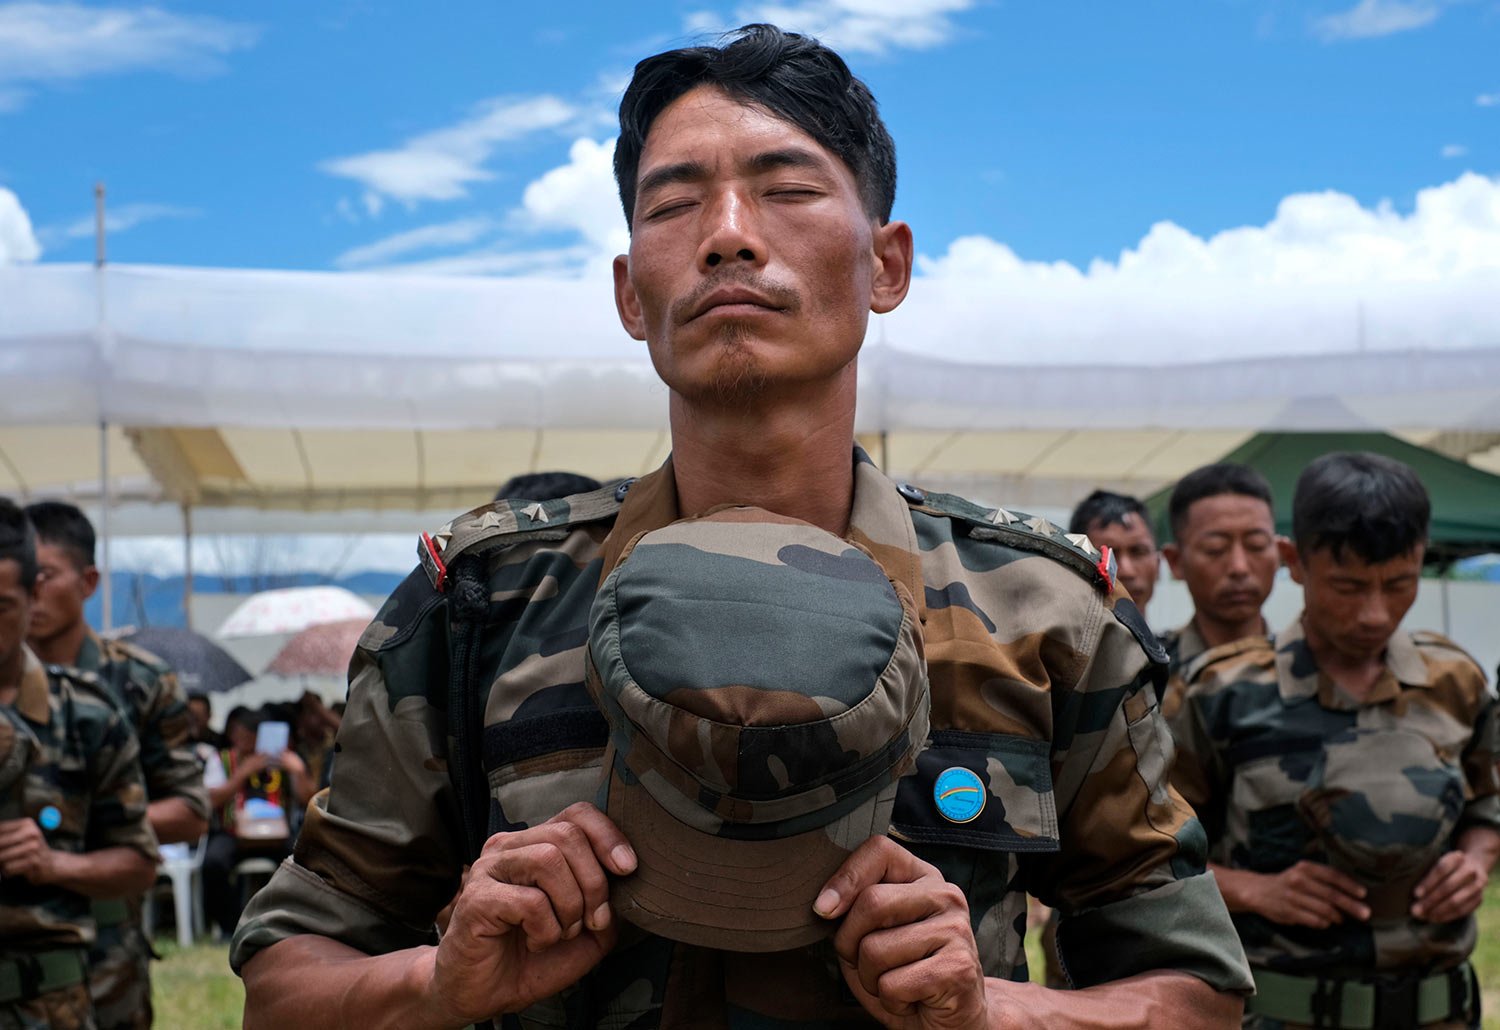  A Naga Army soldier stands in prayer during celebrations marking the Nagas' Declaration of Independence in Chedema, in the northeastern Indian state of Nagaland, Sunday, Aug. 14, 2022.  (AP Photo/Yirmiyan Arthur) 